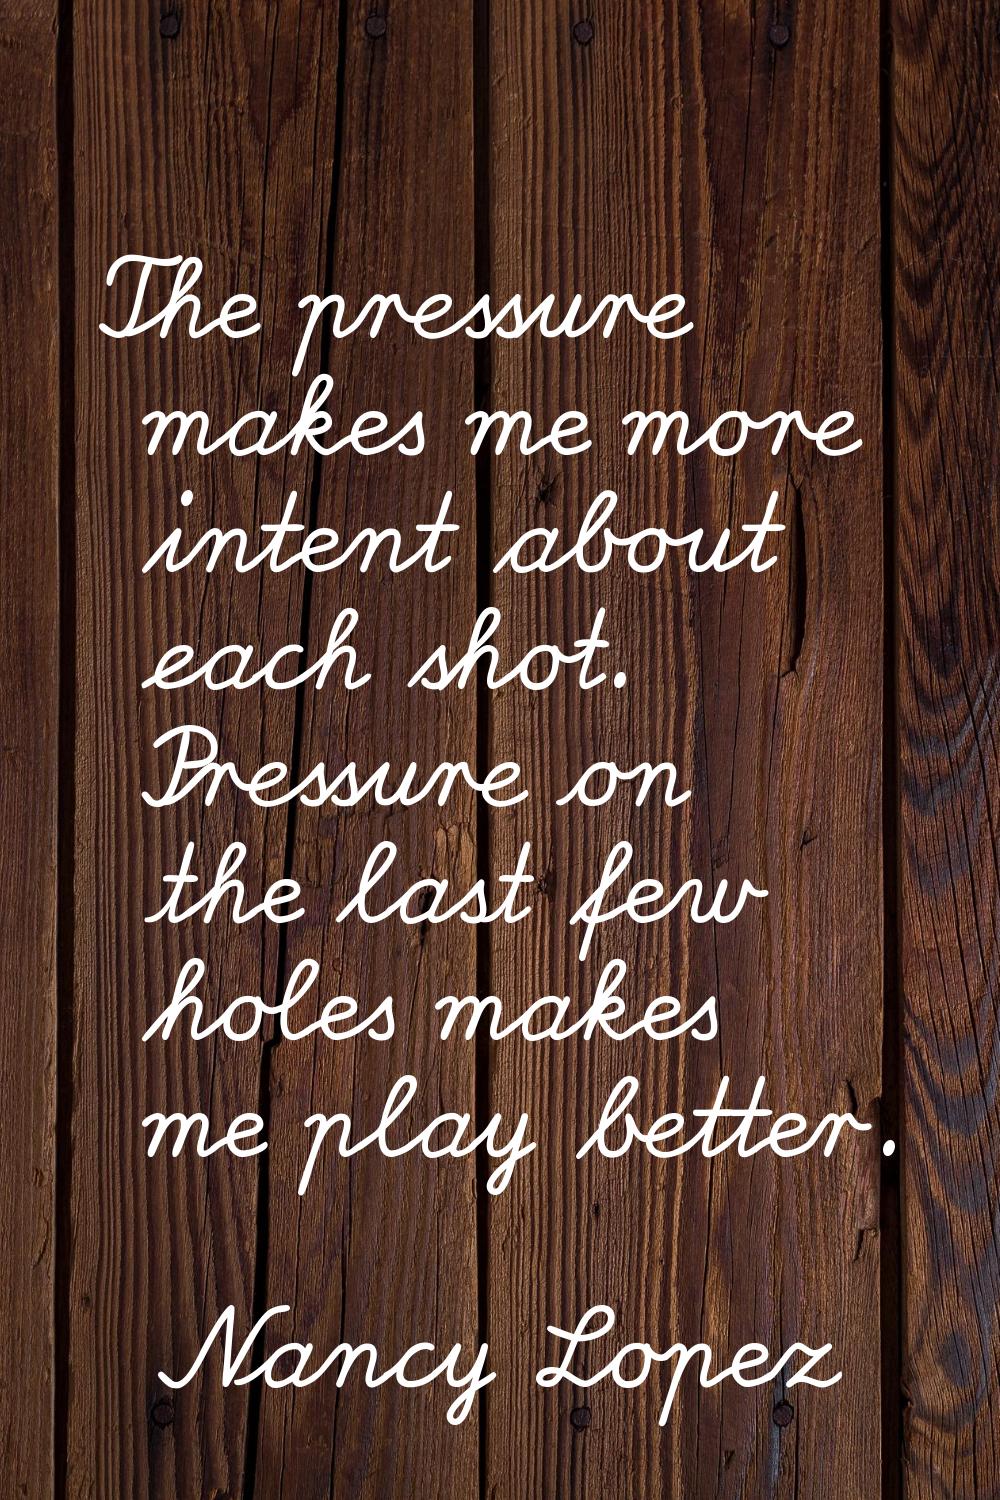 The pressure makes me more intent about each shot. Pressure on the last few holes makes me play bet